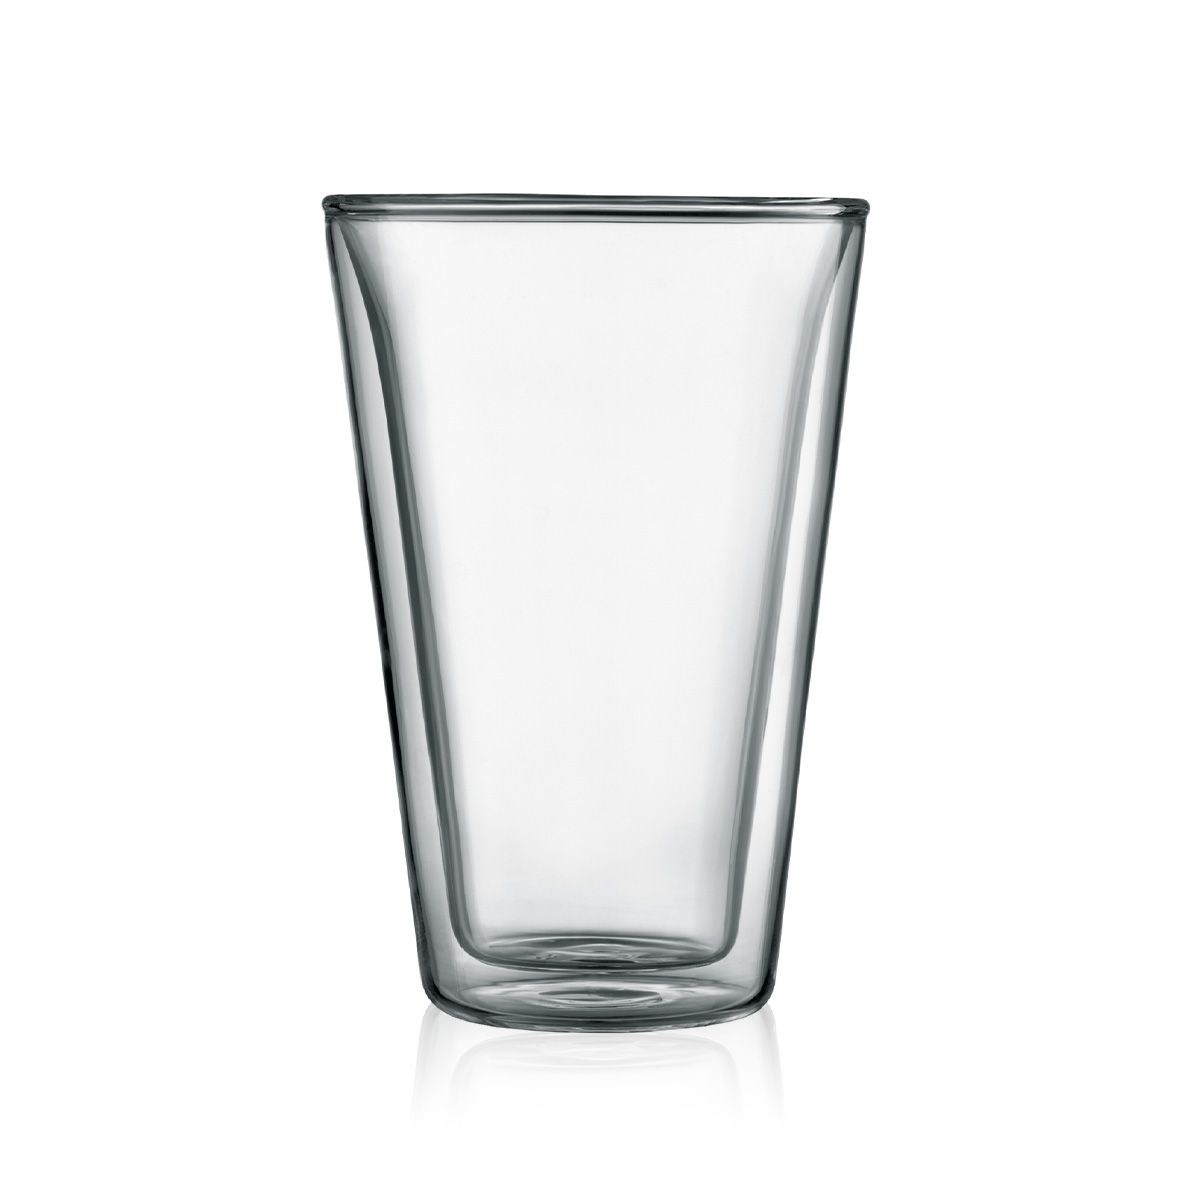 Double Wall Glasses CANTEEN - 6 pieces set 0.4 L